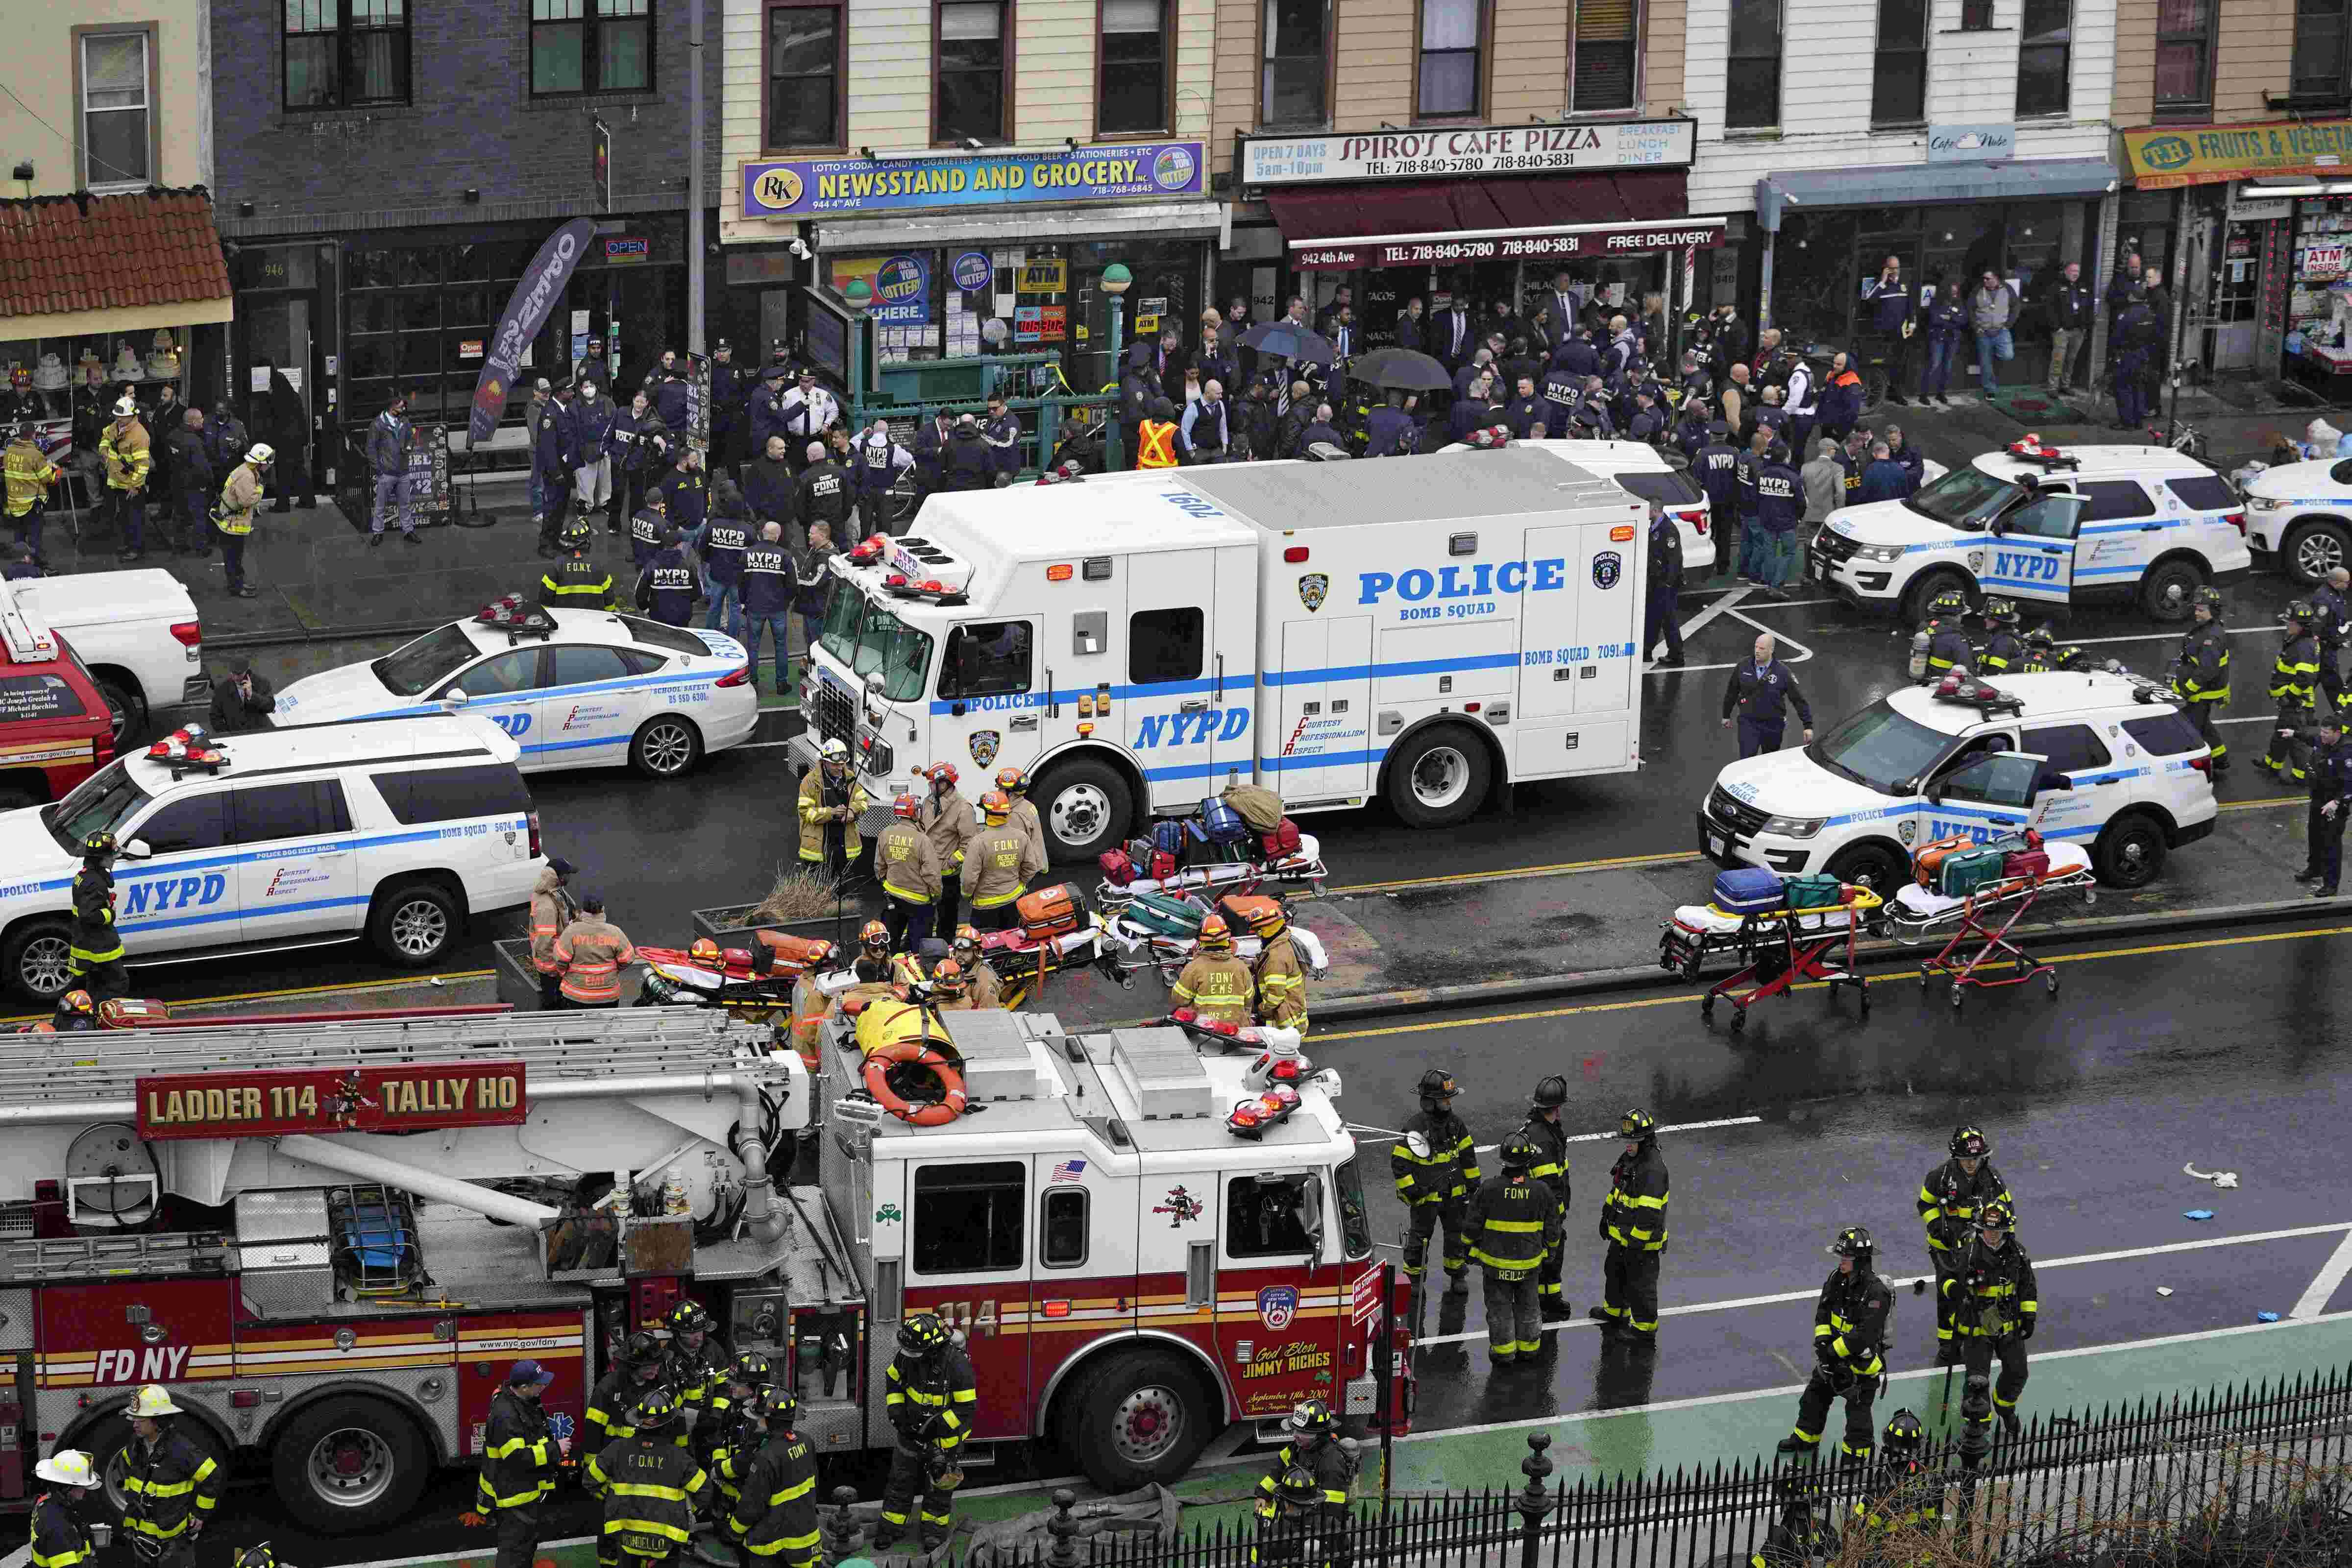 5 shot, unexploded devices found at NYC train station